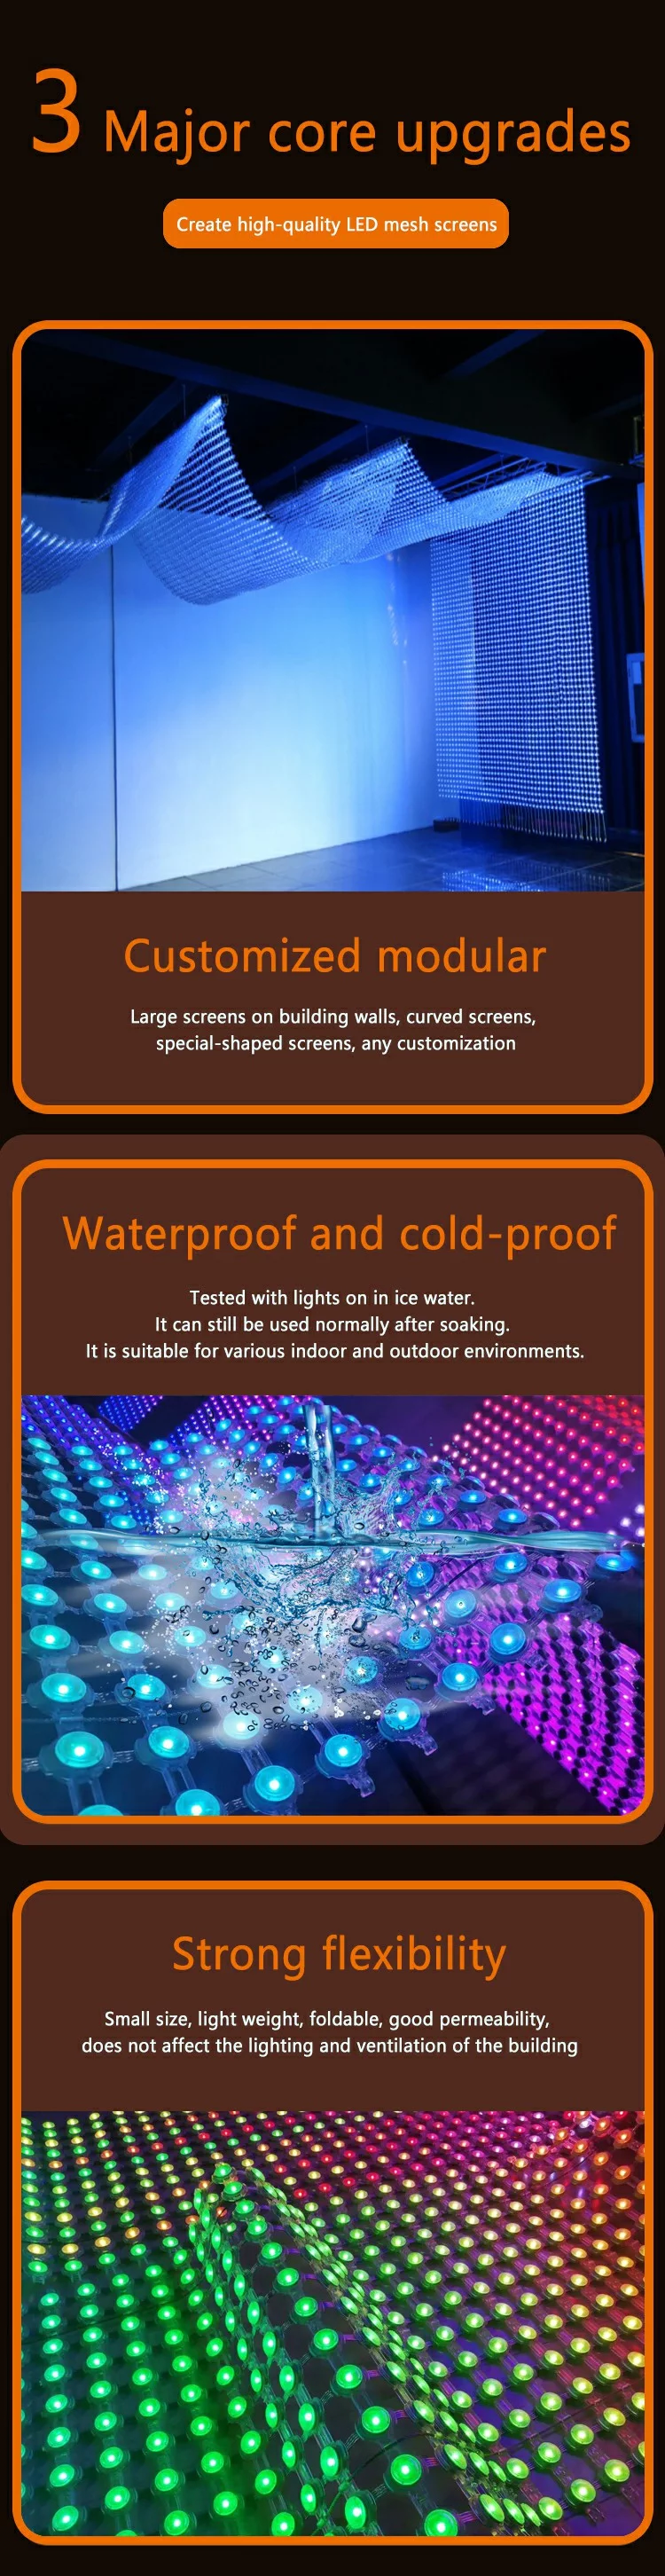 P50 DMX Outdoor LED Point Light Mesh Screen Video Wall - Flexible Display Screen LED Curtain in Vietnam